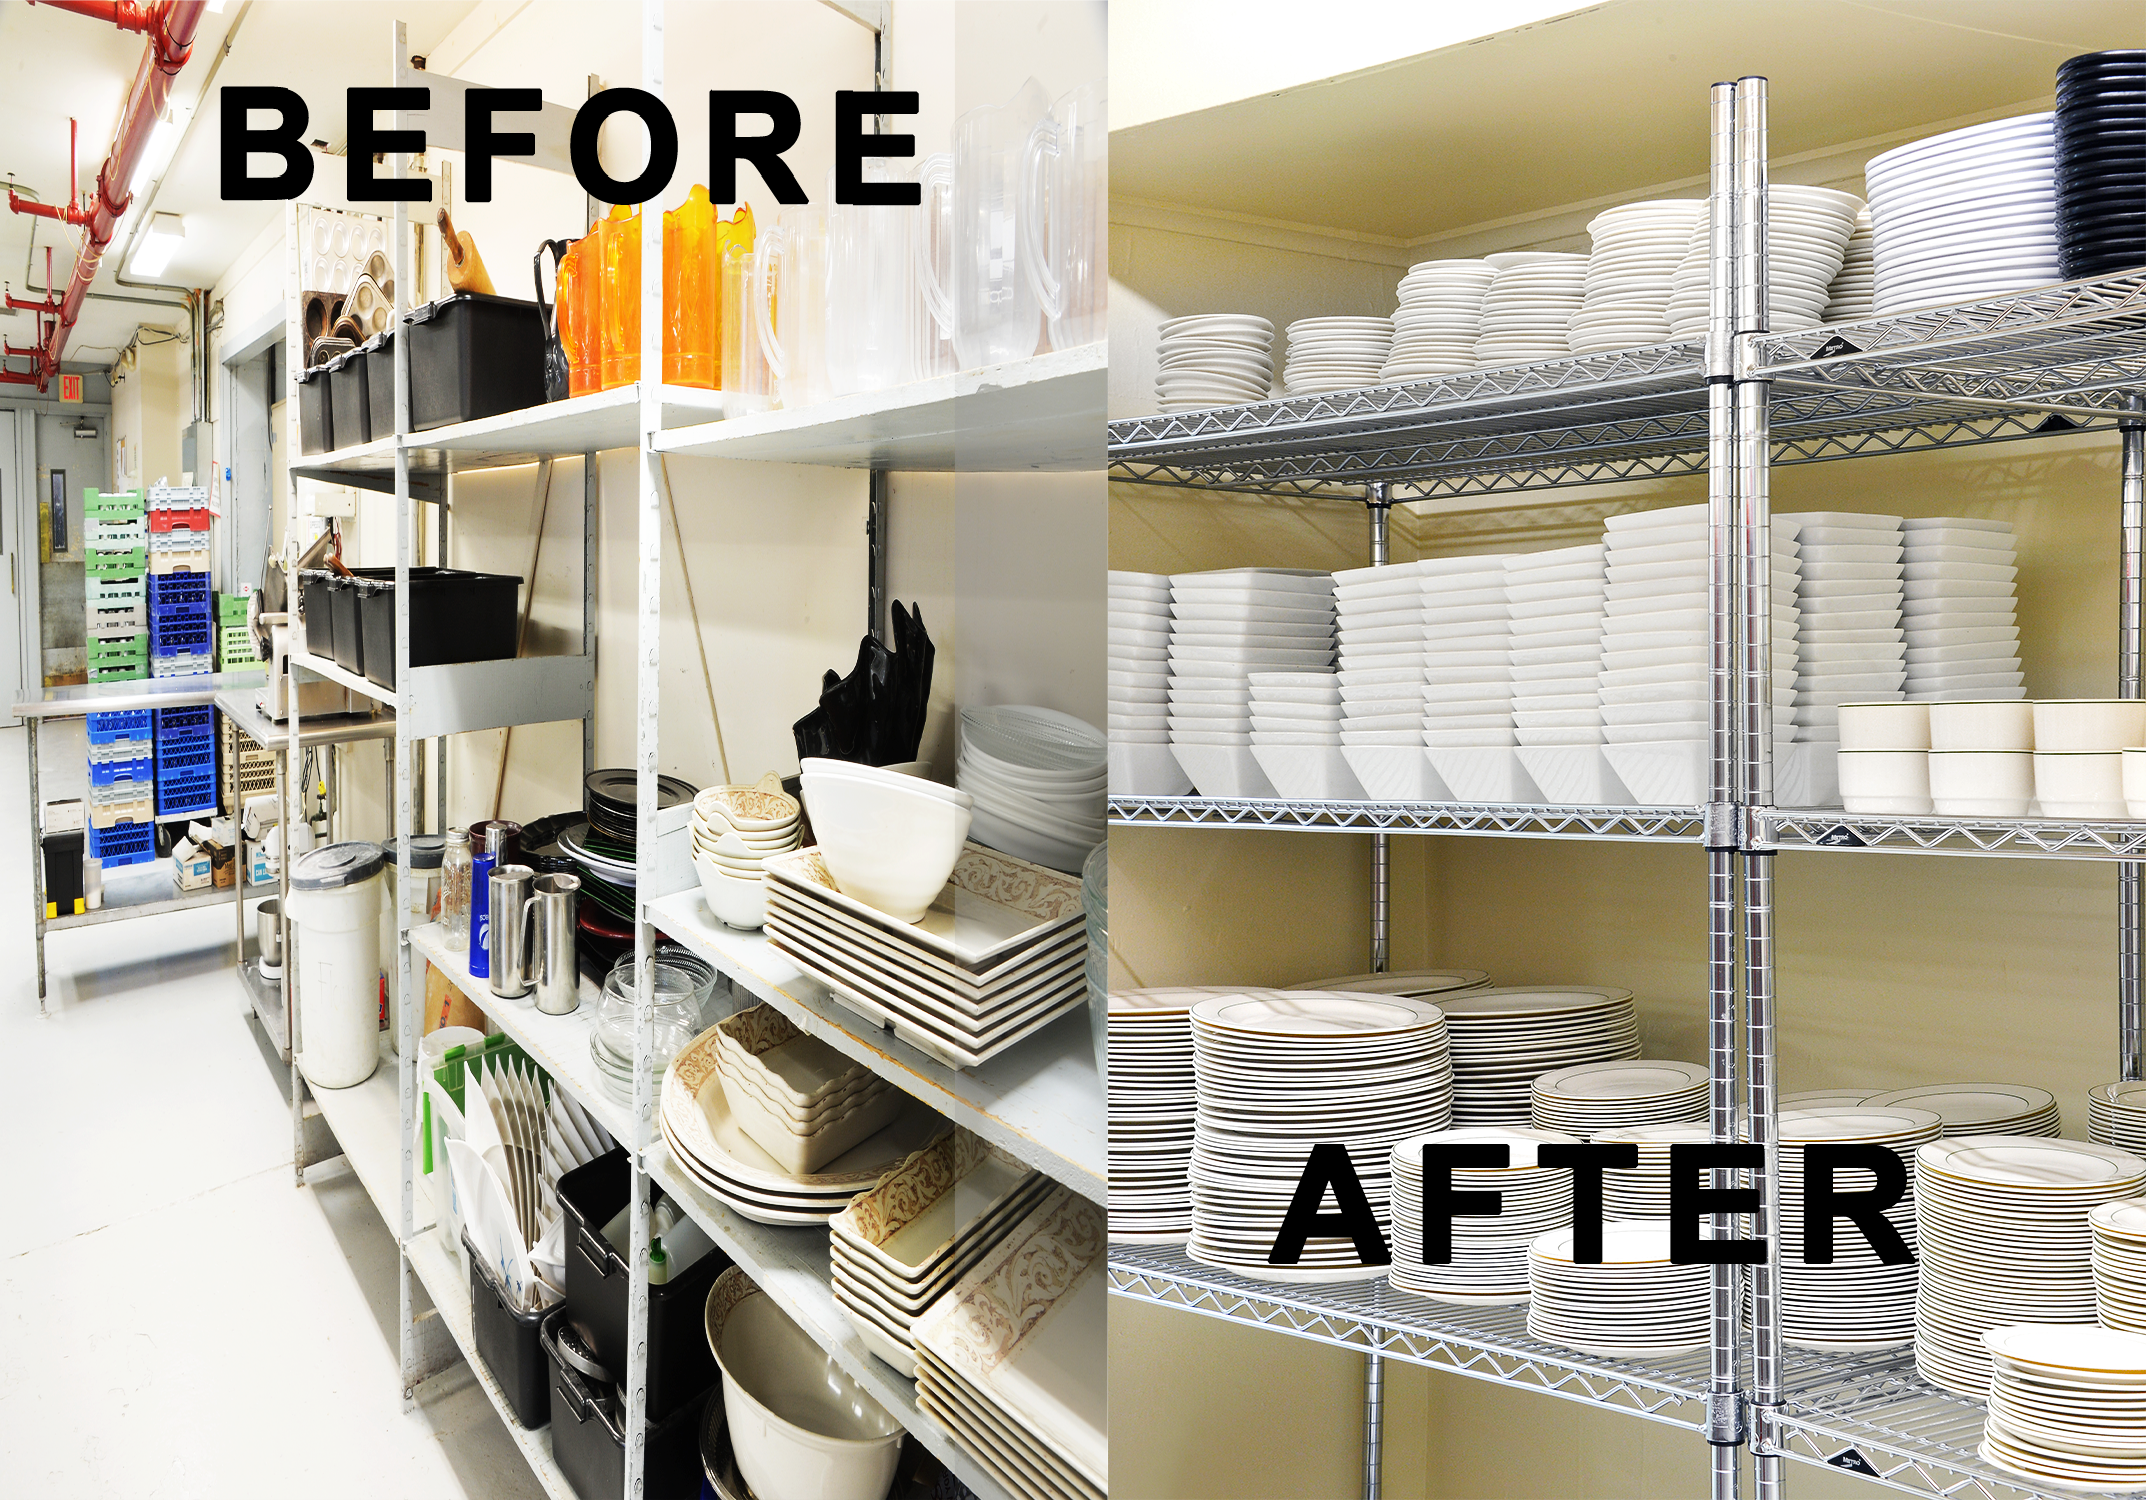 Before and after photograph of an unorganized and organized pantry.